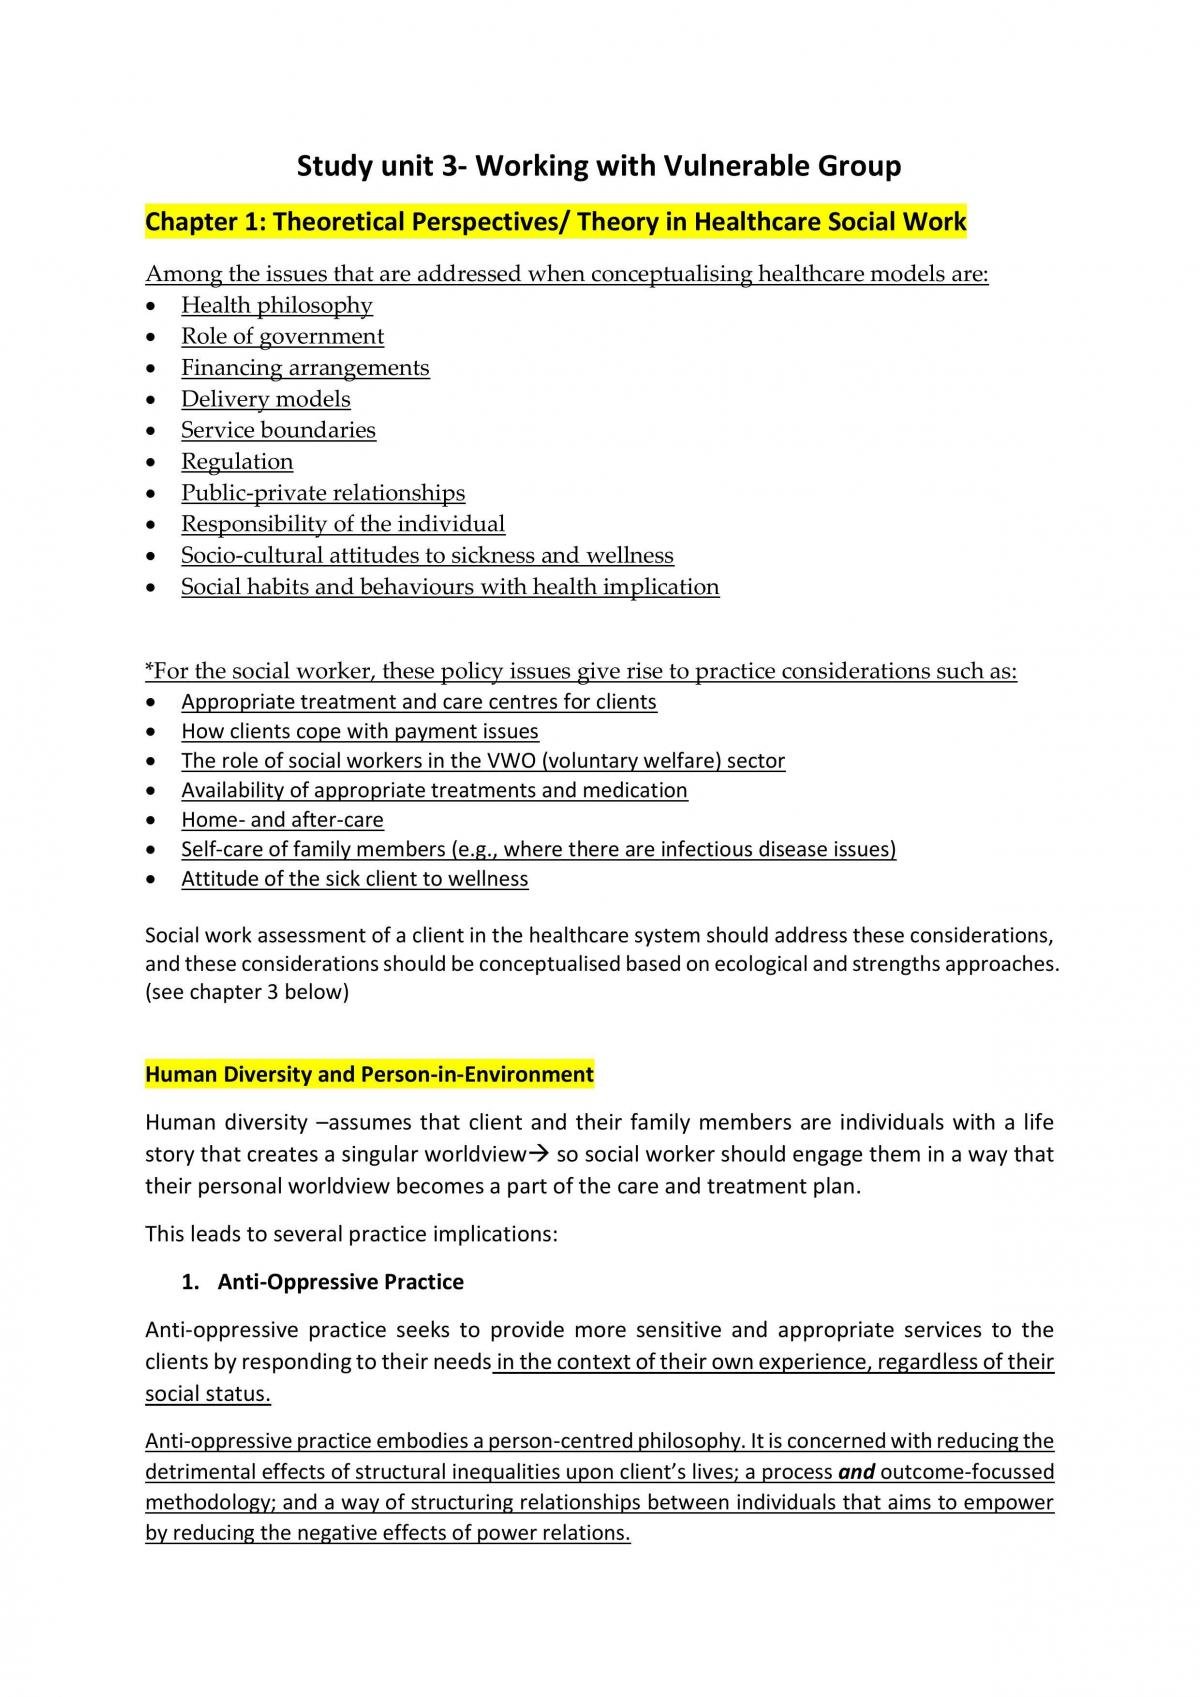 SWK356 Social Work in Healthcare Exam Notes - Page 34